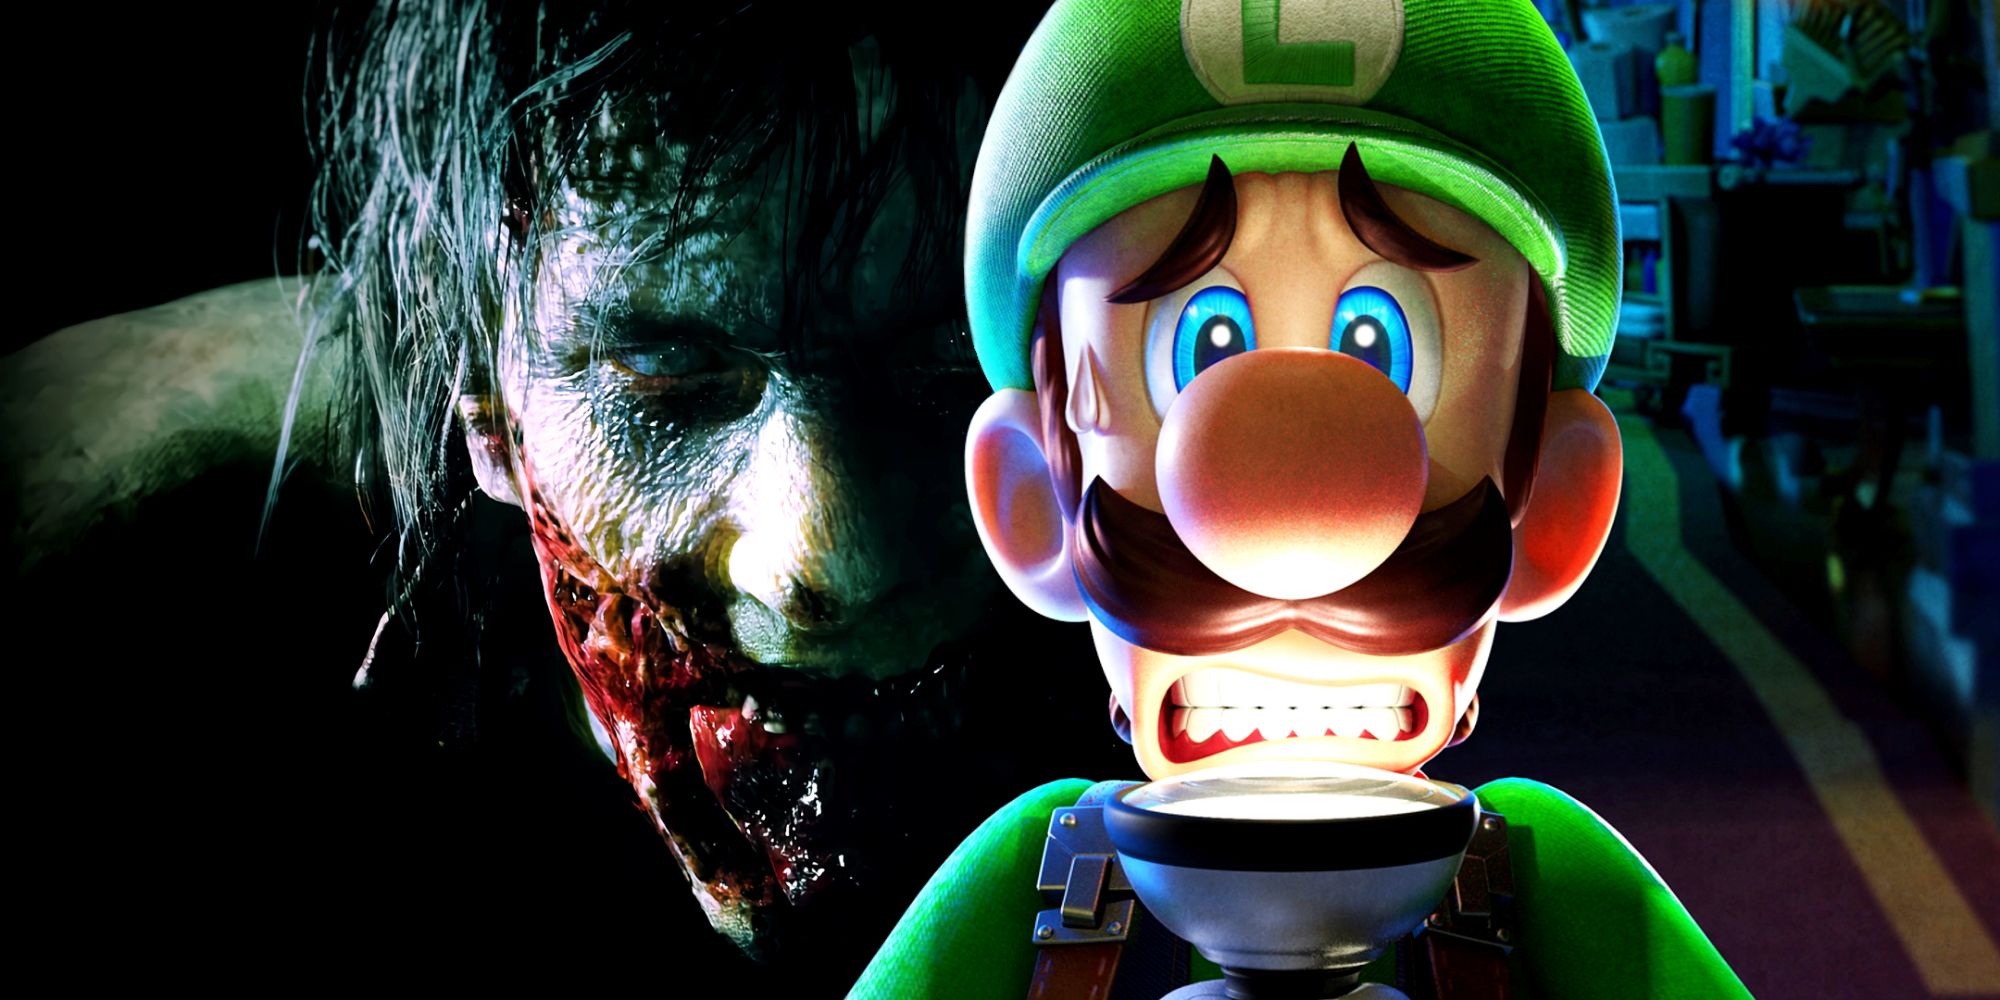 Luigis Mansion Was Actually Inspired By This Ultra-Violent Horror Franchise